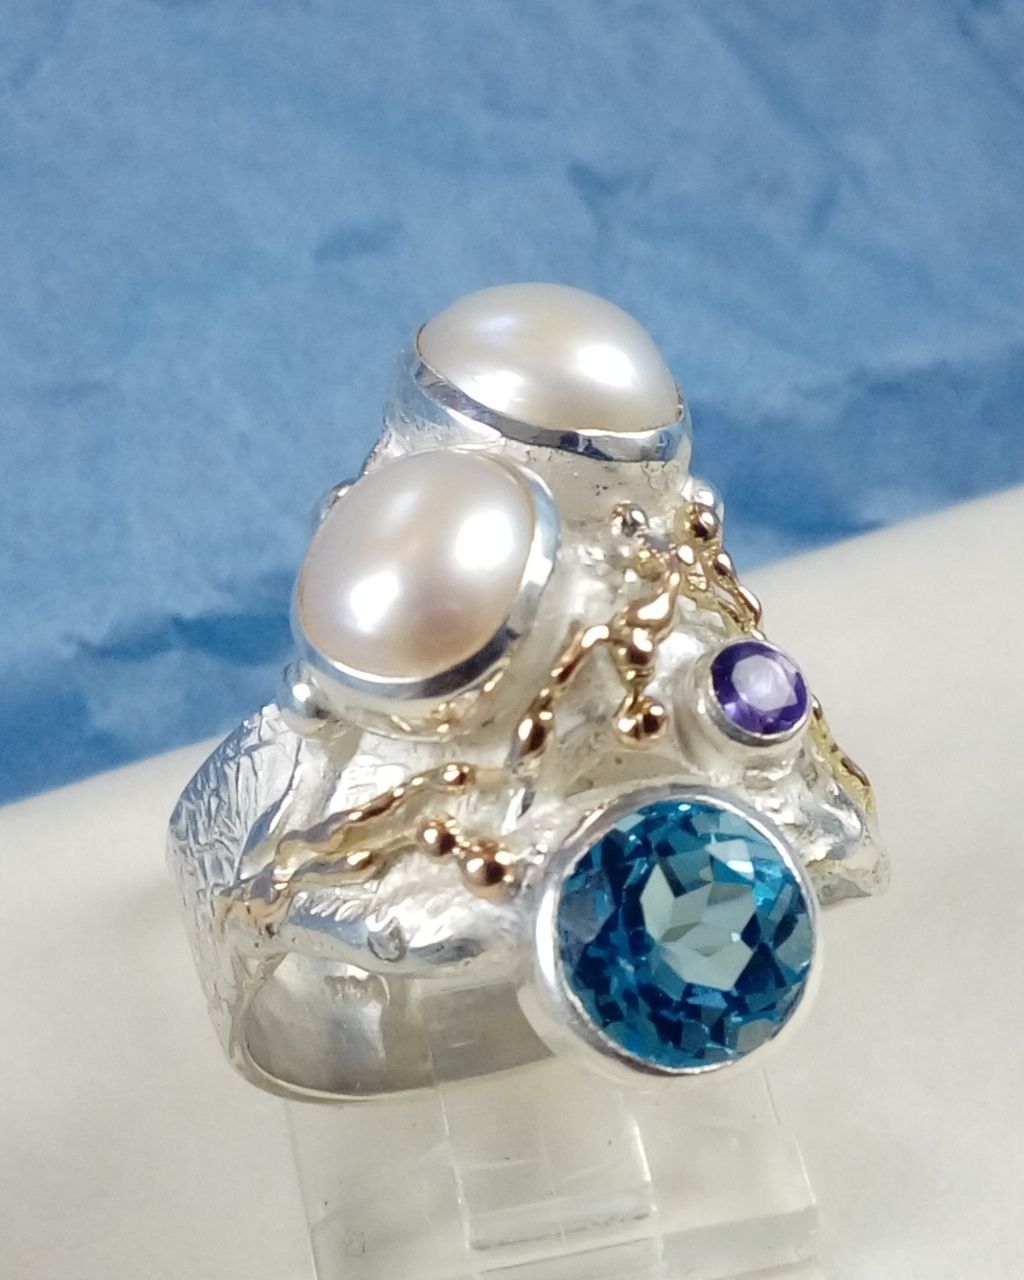 natural pearl and gemstone handcrafted jewelry, silver jewelry with color stones, contemporary jewellery collectible, fine jewellery with gemstones for aucitons, art jewelry with facet cut gemstones and natural pearls, contemporary jewelry with real stones, contemporary jewelry made by artist, Gregory Pyra Piro ring 7320, jewelry with amethyst and blue topaz together, ring with topaz and pearl together, ring with amethyst and pearl together,jewellery artist in Europe, designer jewellery sold at auctions and art galleries, where to find auctions with fine art and designer jewellery, bidding on auctions with designer jewellery, ring with amethyst and blutopaz, rings sold in art and craft galleries